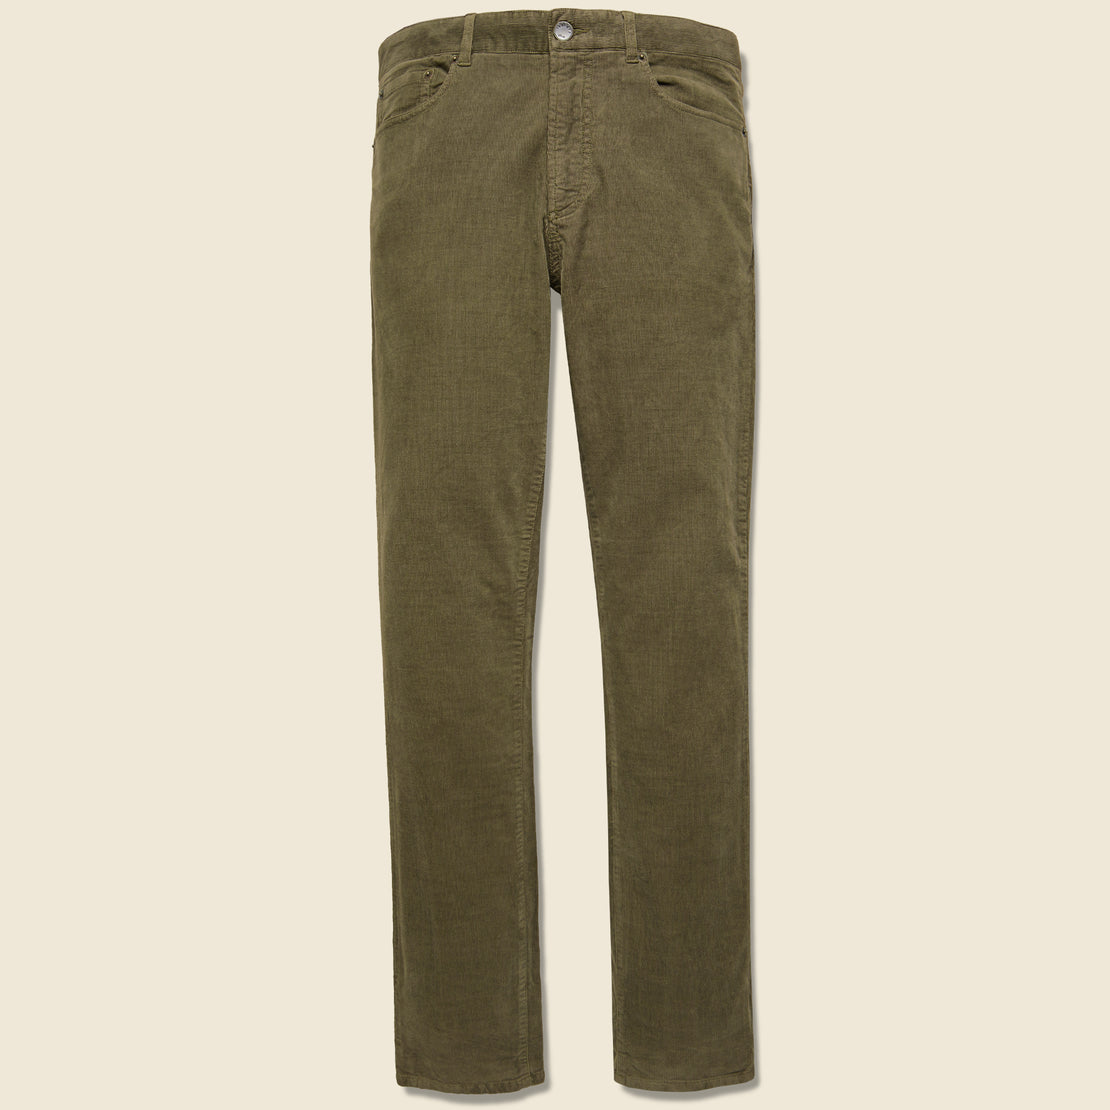 Faherty Stretch Corduroy Pant - Timber